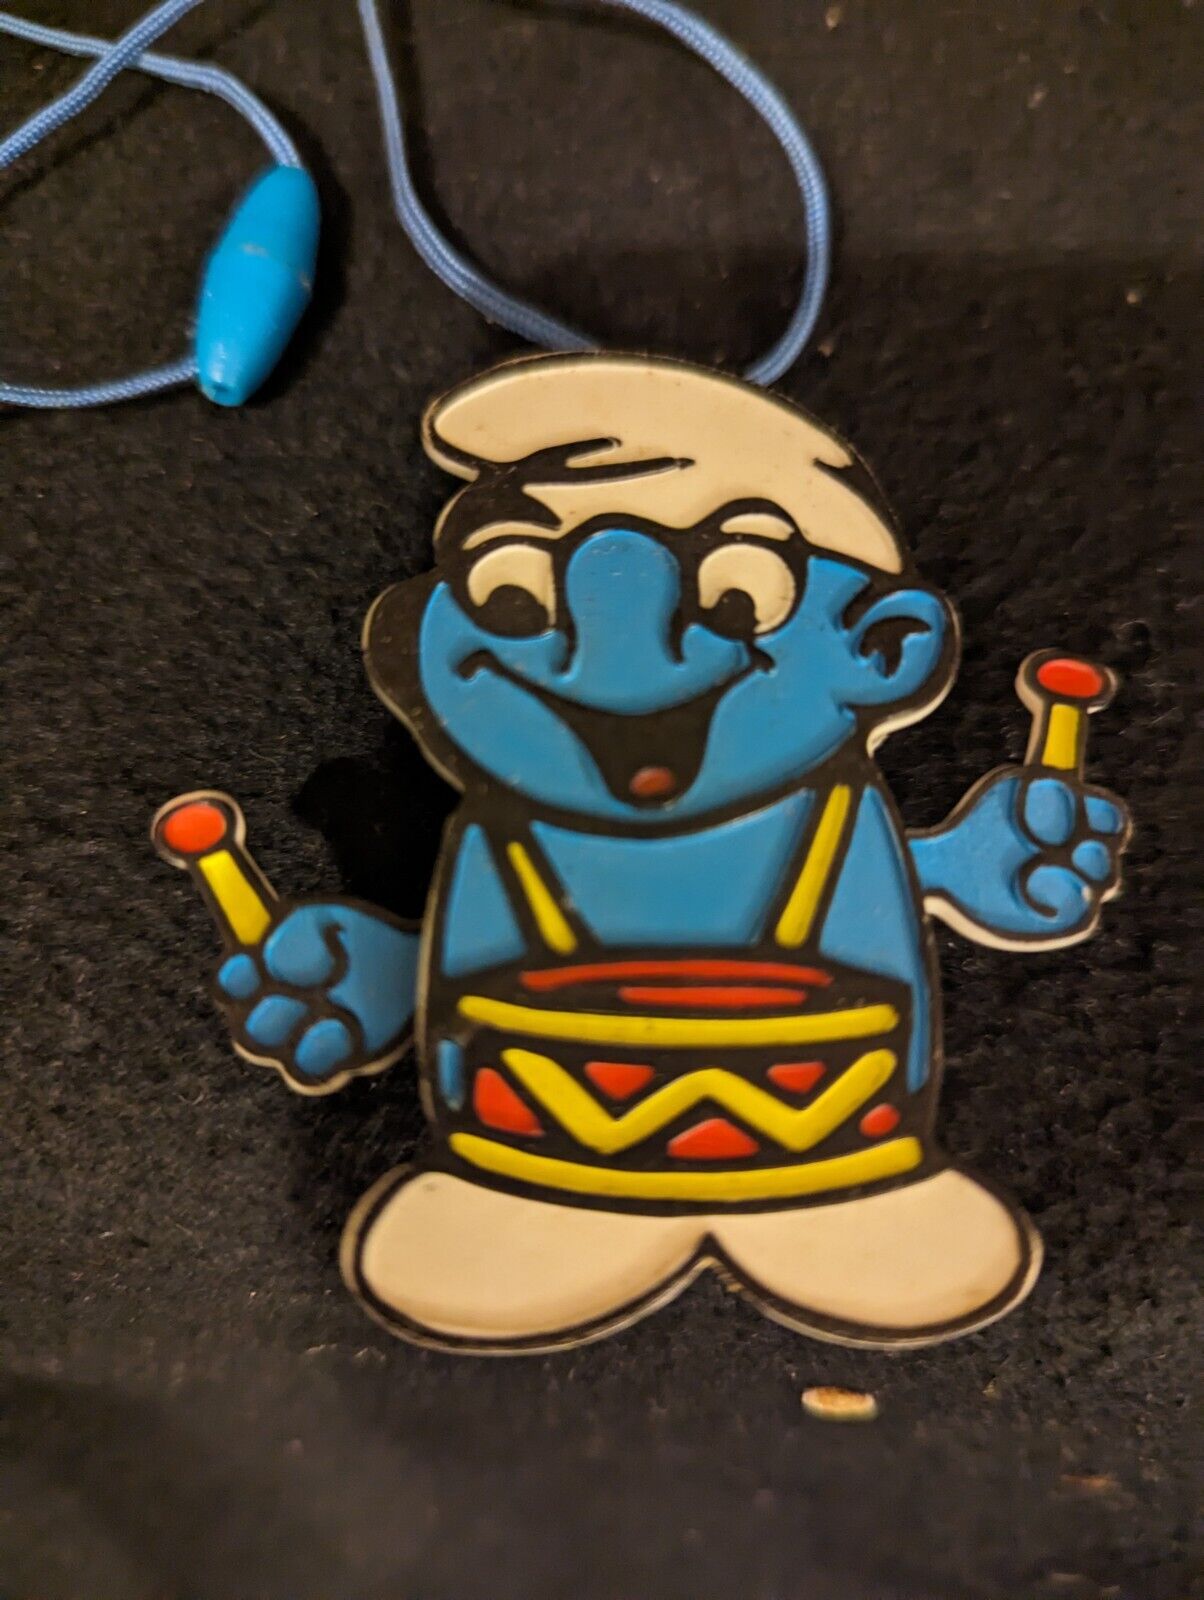 Vintage 1982 smurf neckless  playing drums movement   - 1 owner